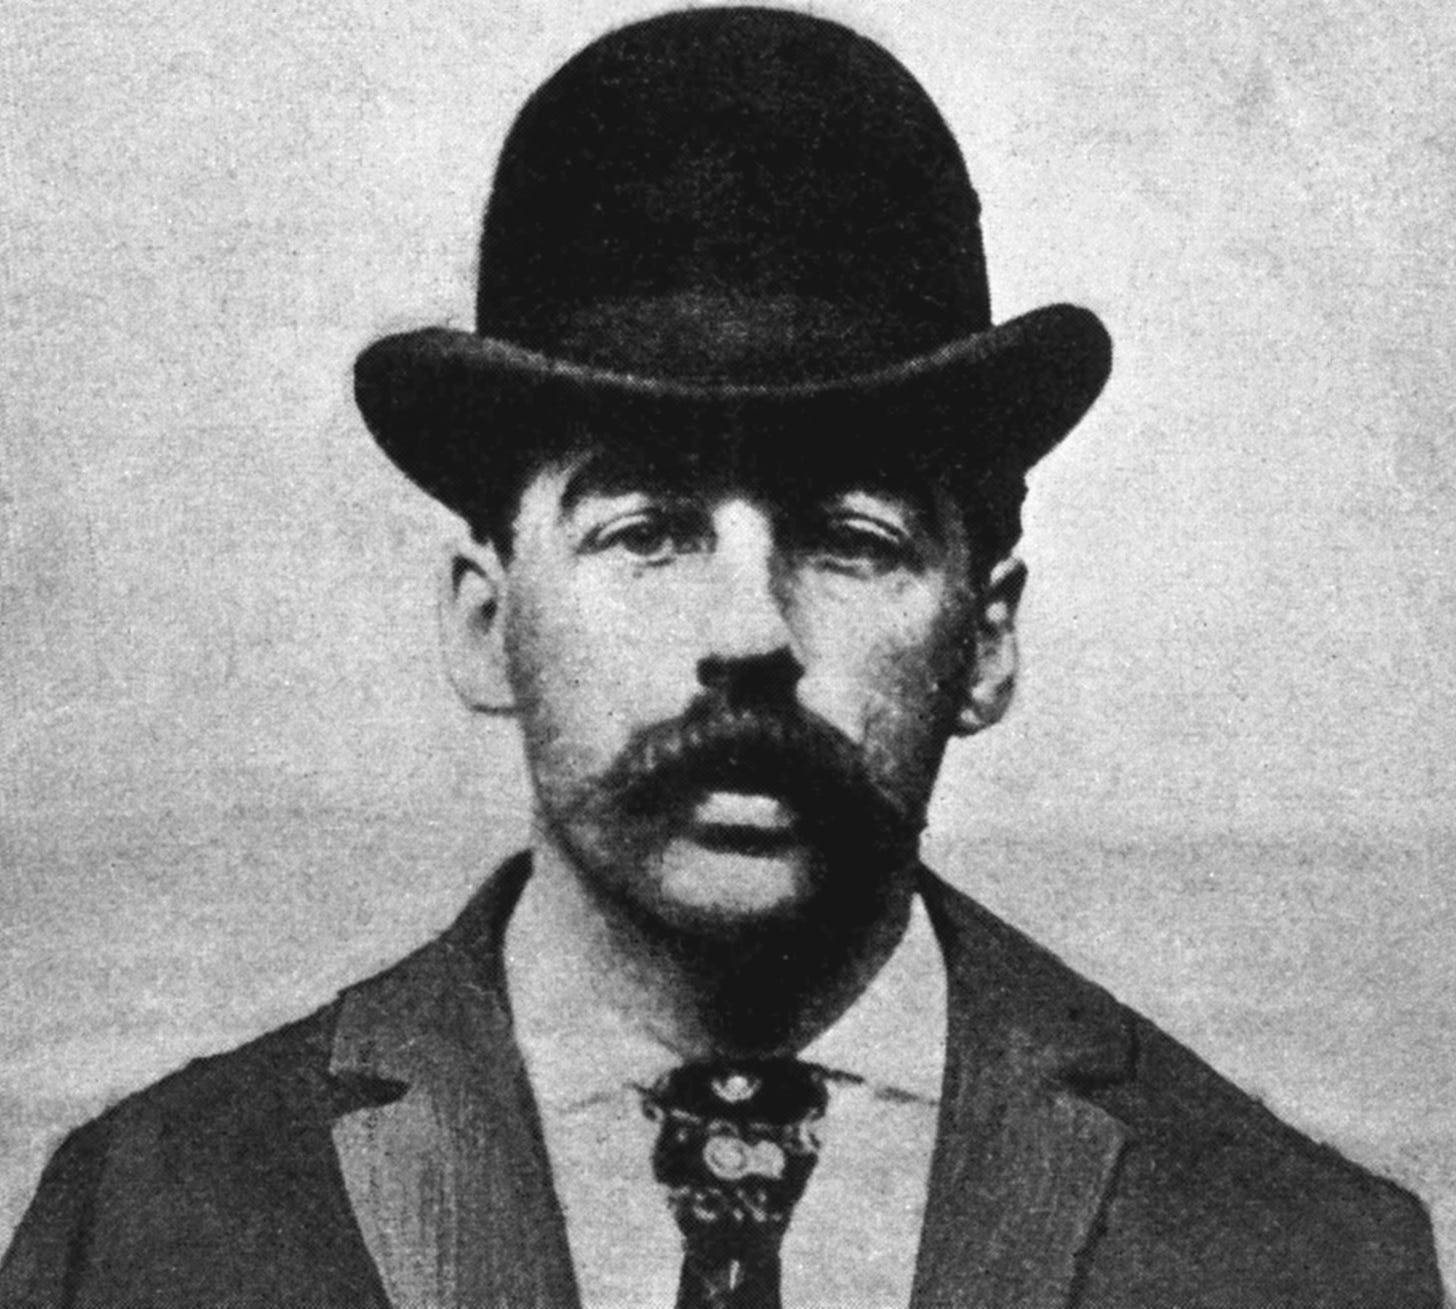 H.H. Holmes - Crime Museum